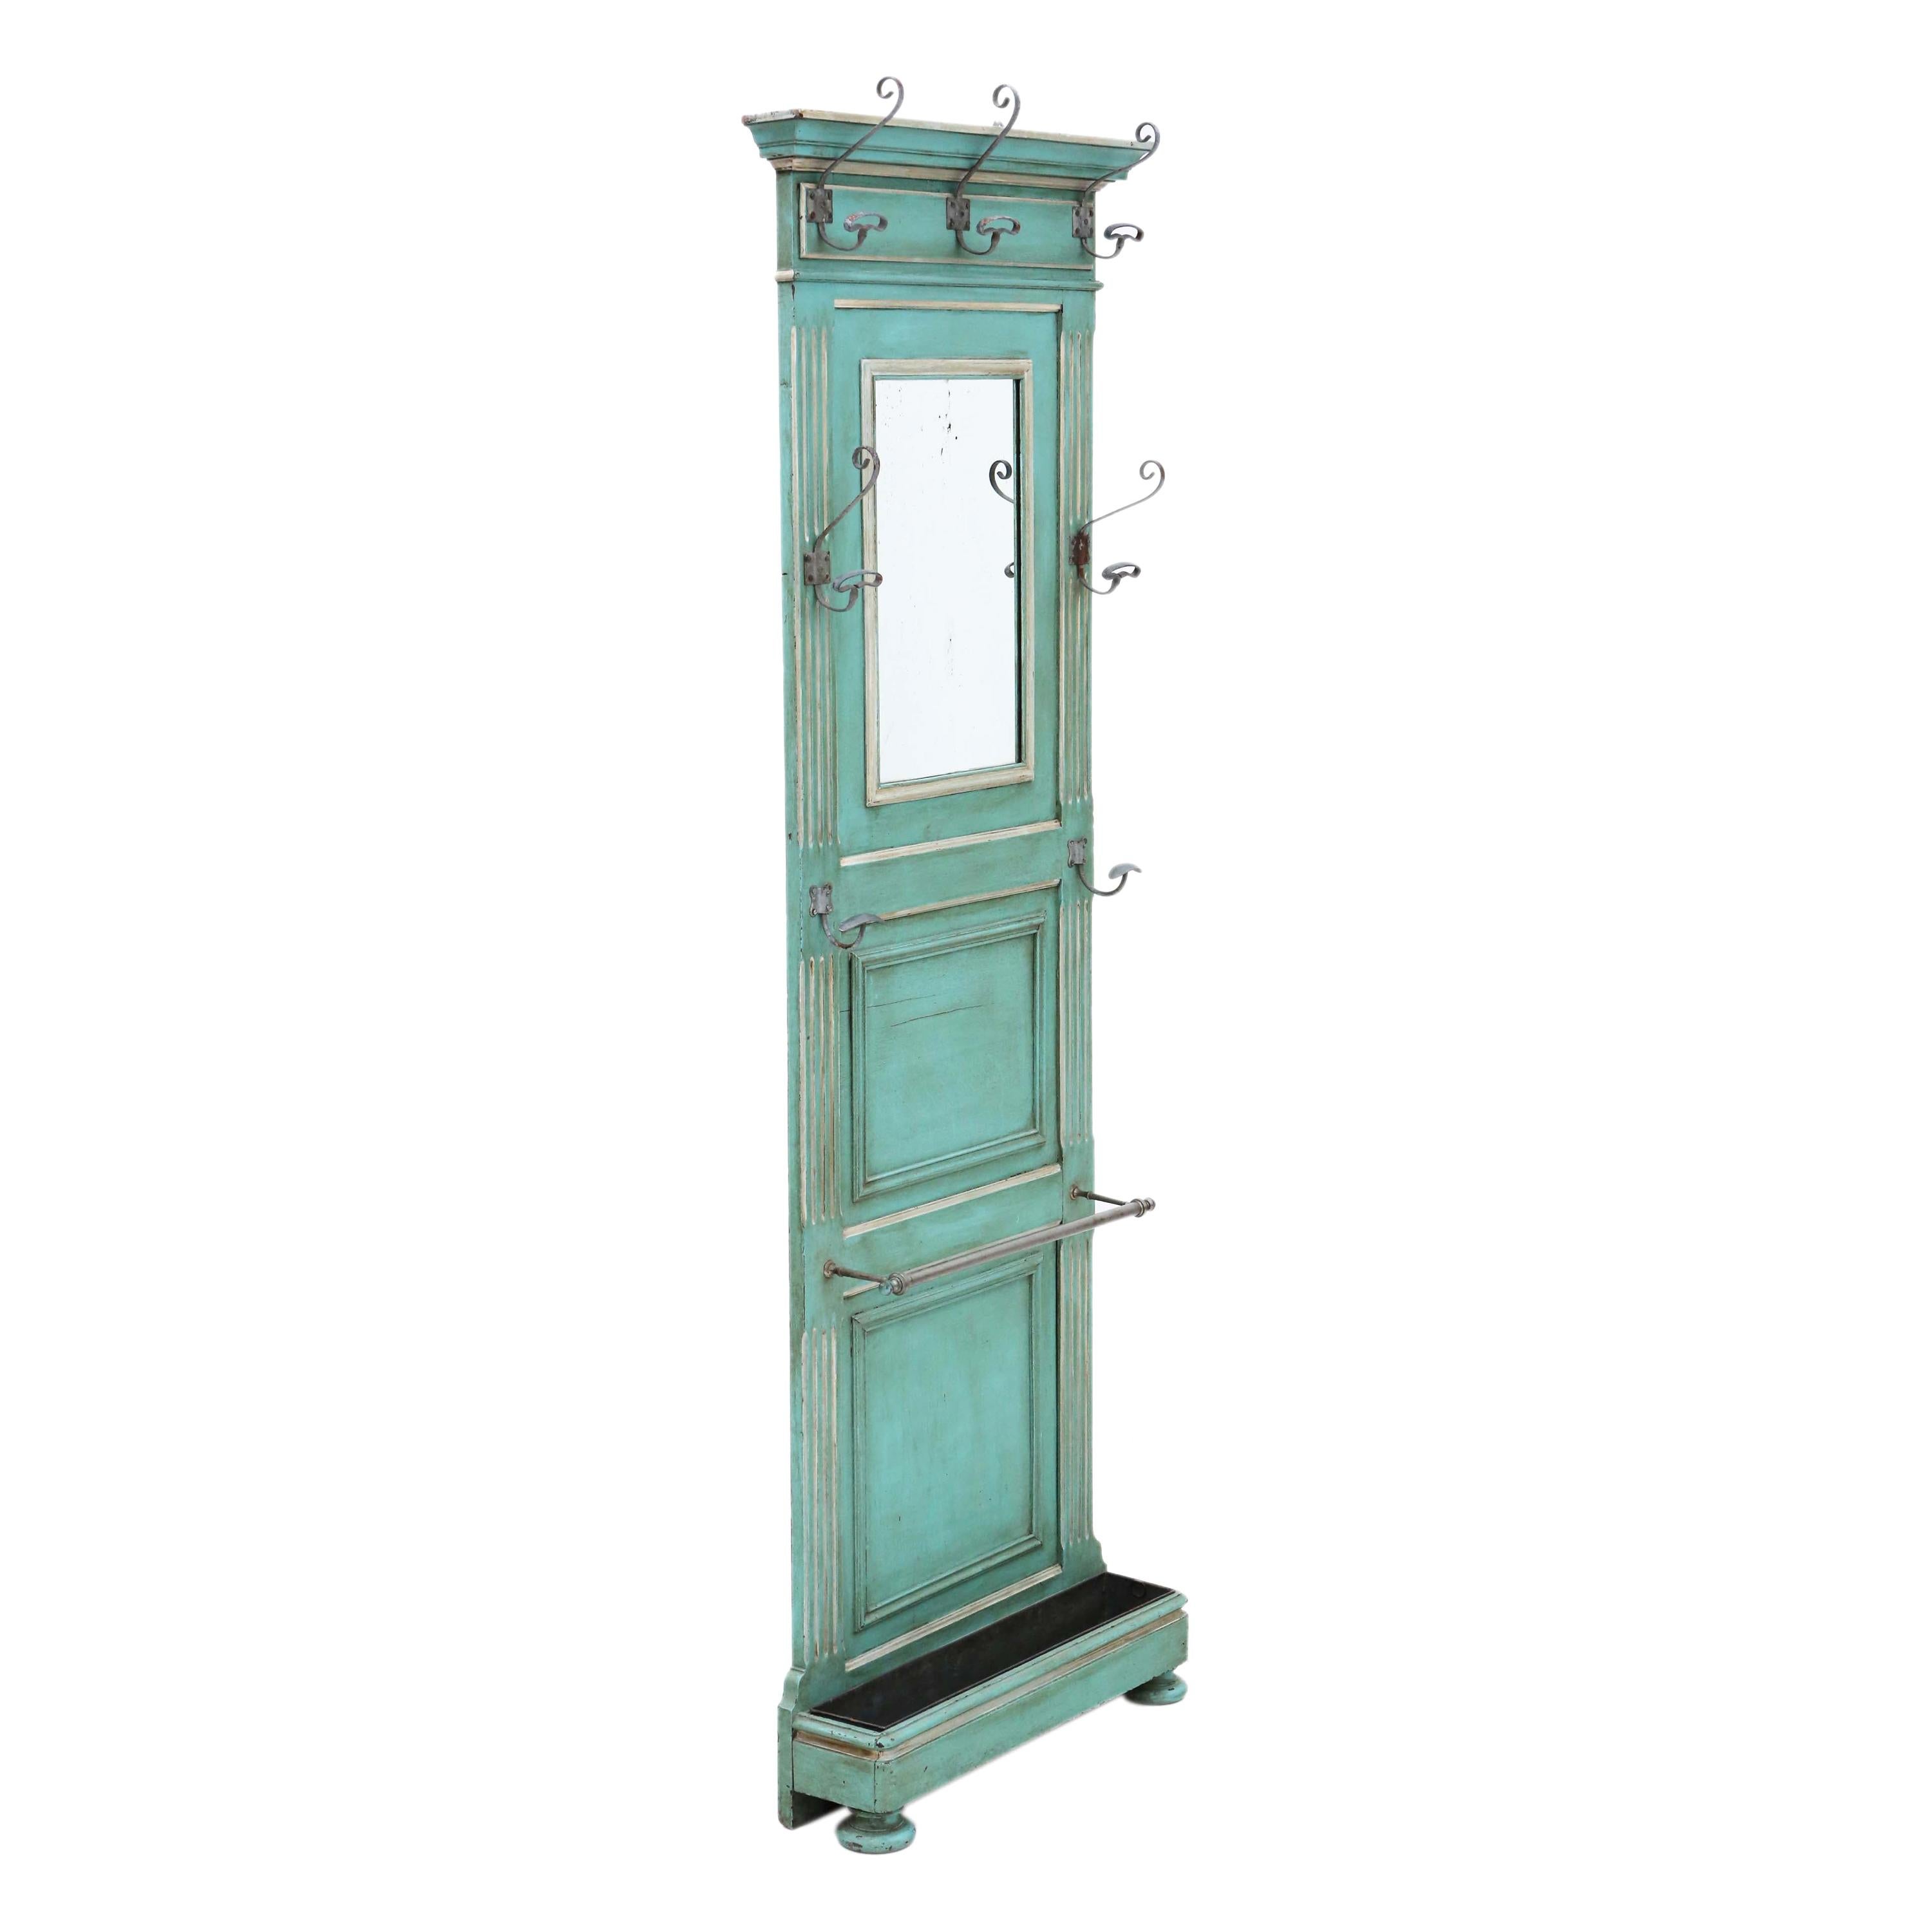 cane stand Fabulous antique French 19th Century wood & cannage hall stand in original worn green paint umbrella stand rack